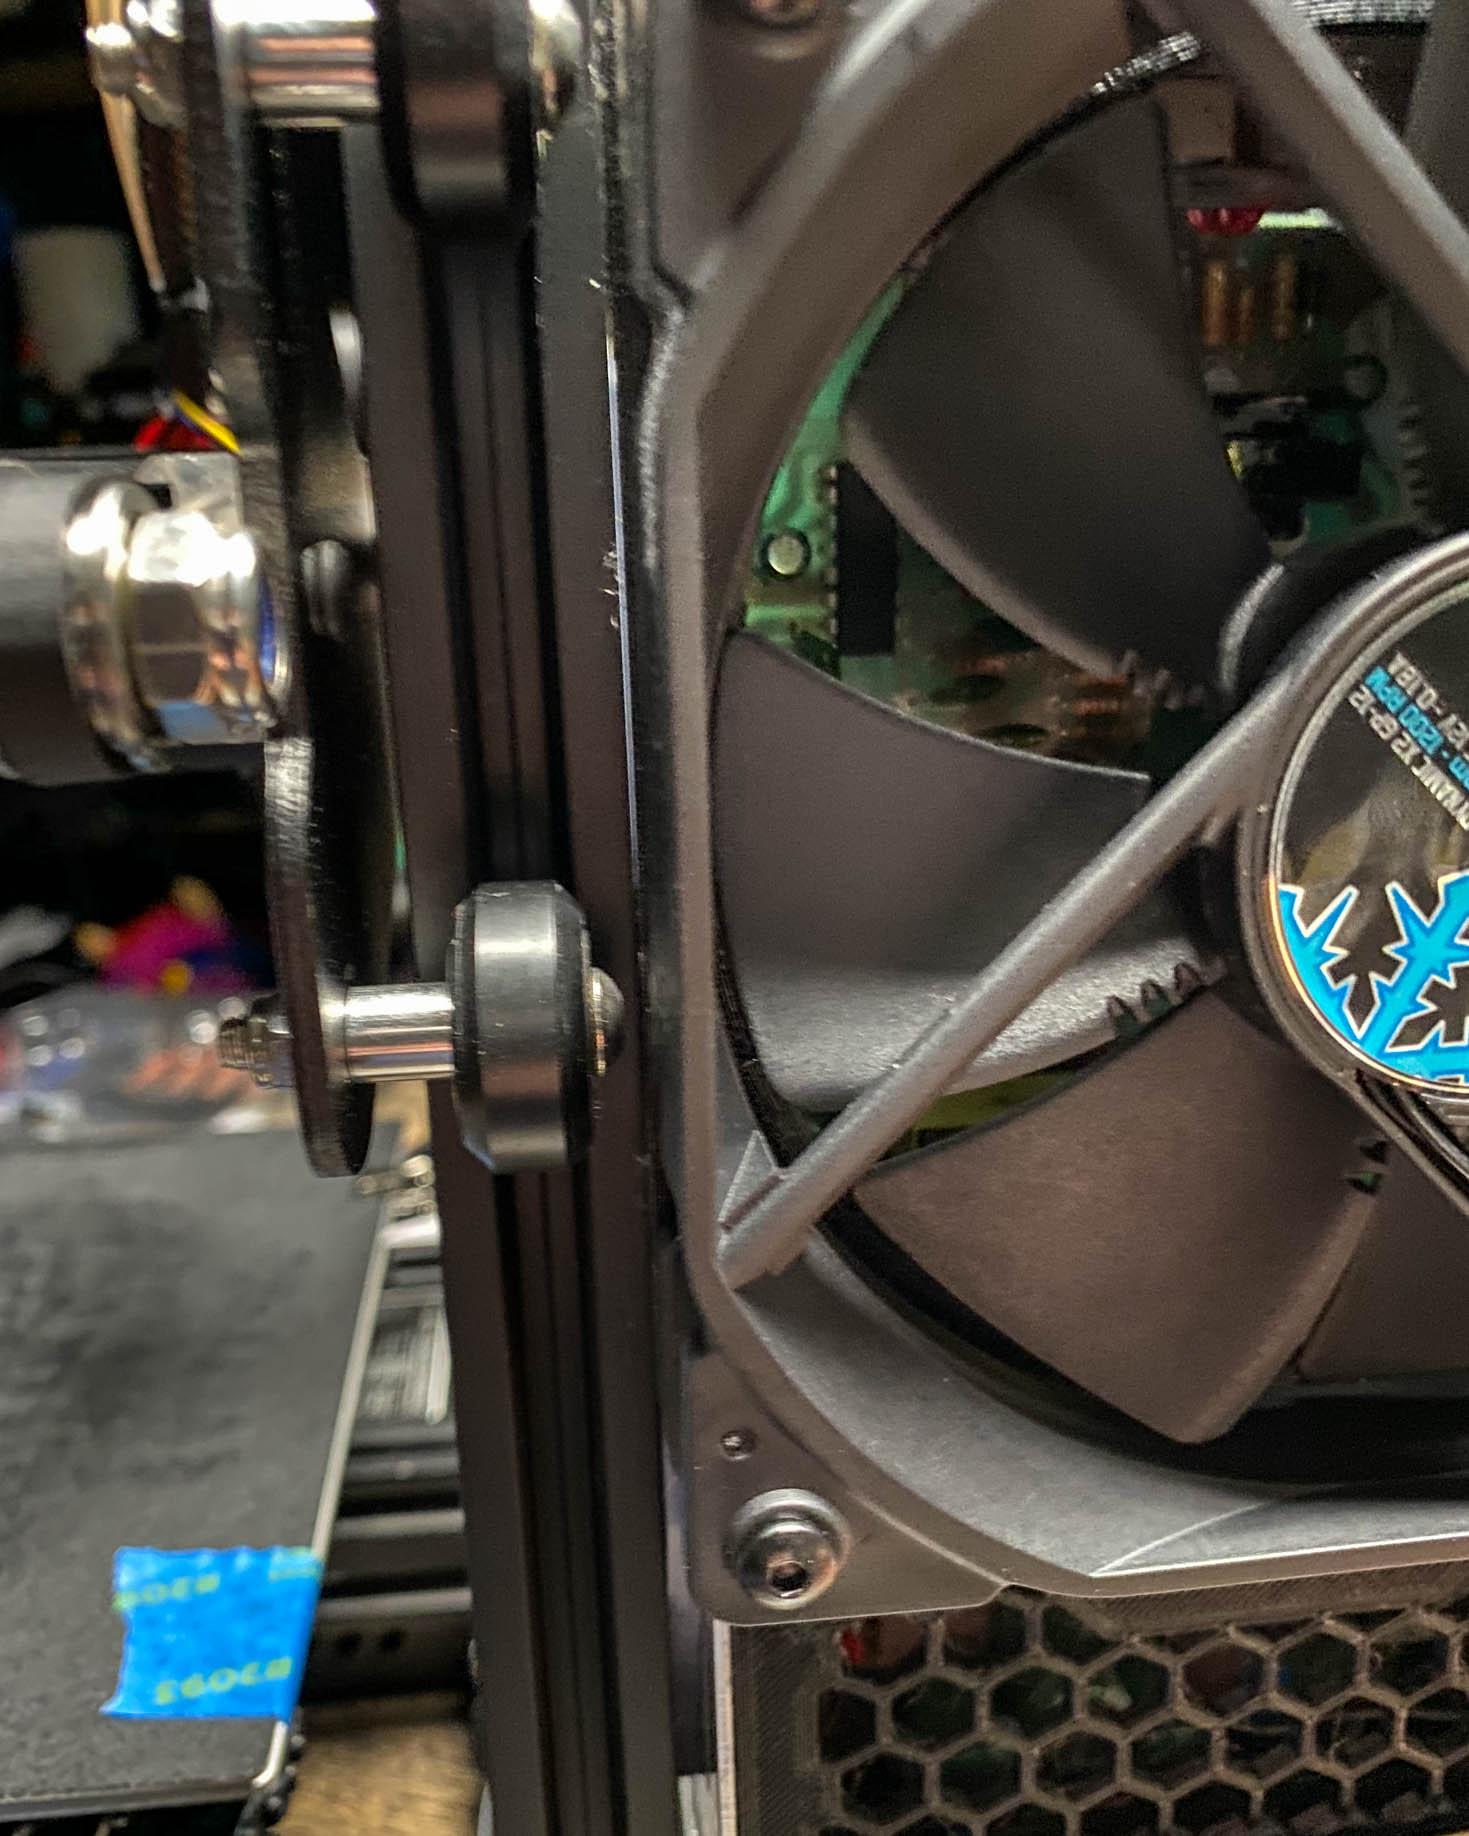 Ender 3 120mm PSU Mod Fan Cover with Buck Converter Mount - Spacer Installed between Z Axis extrusion and Power Supply to clear fan / rollers. - 3d model